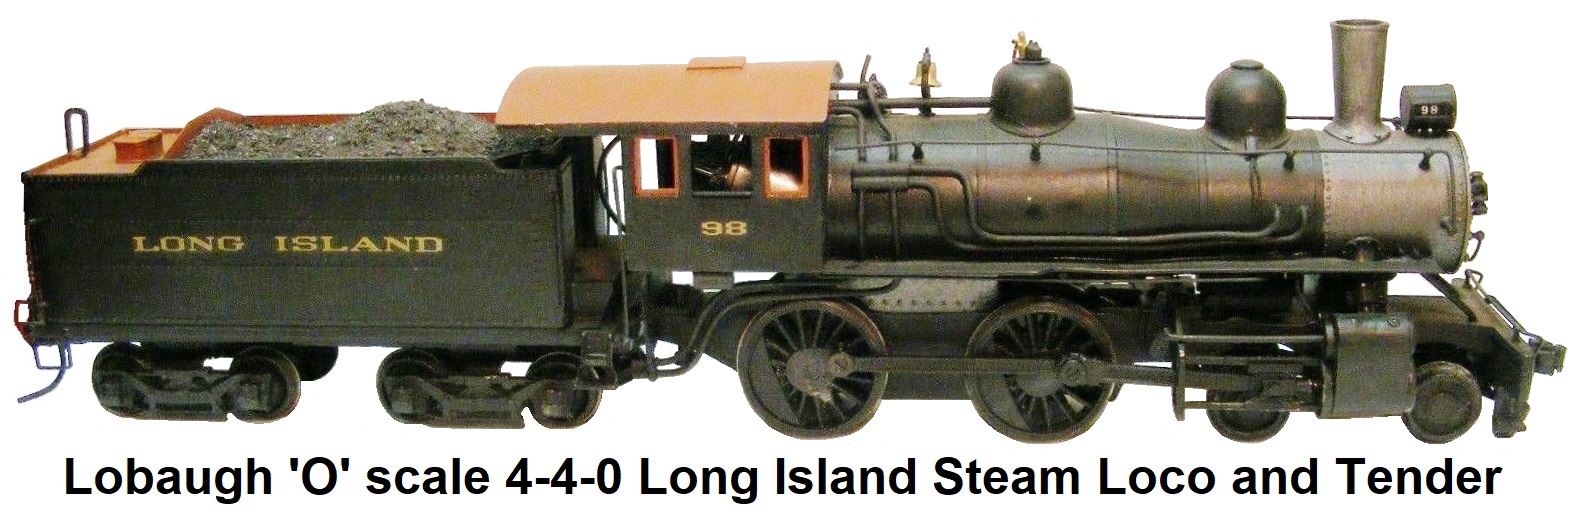 Lobaugh 'O' Scale 4-4-0 steam loco, first offered in the 1941 catalog